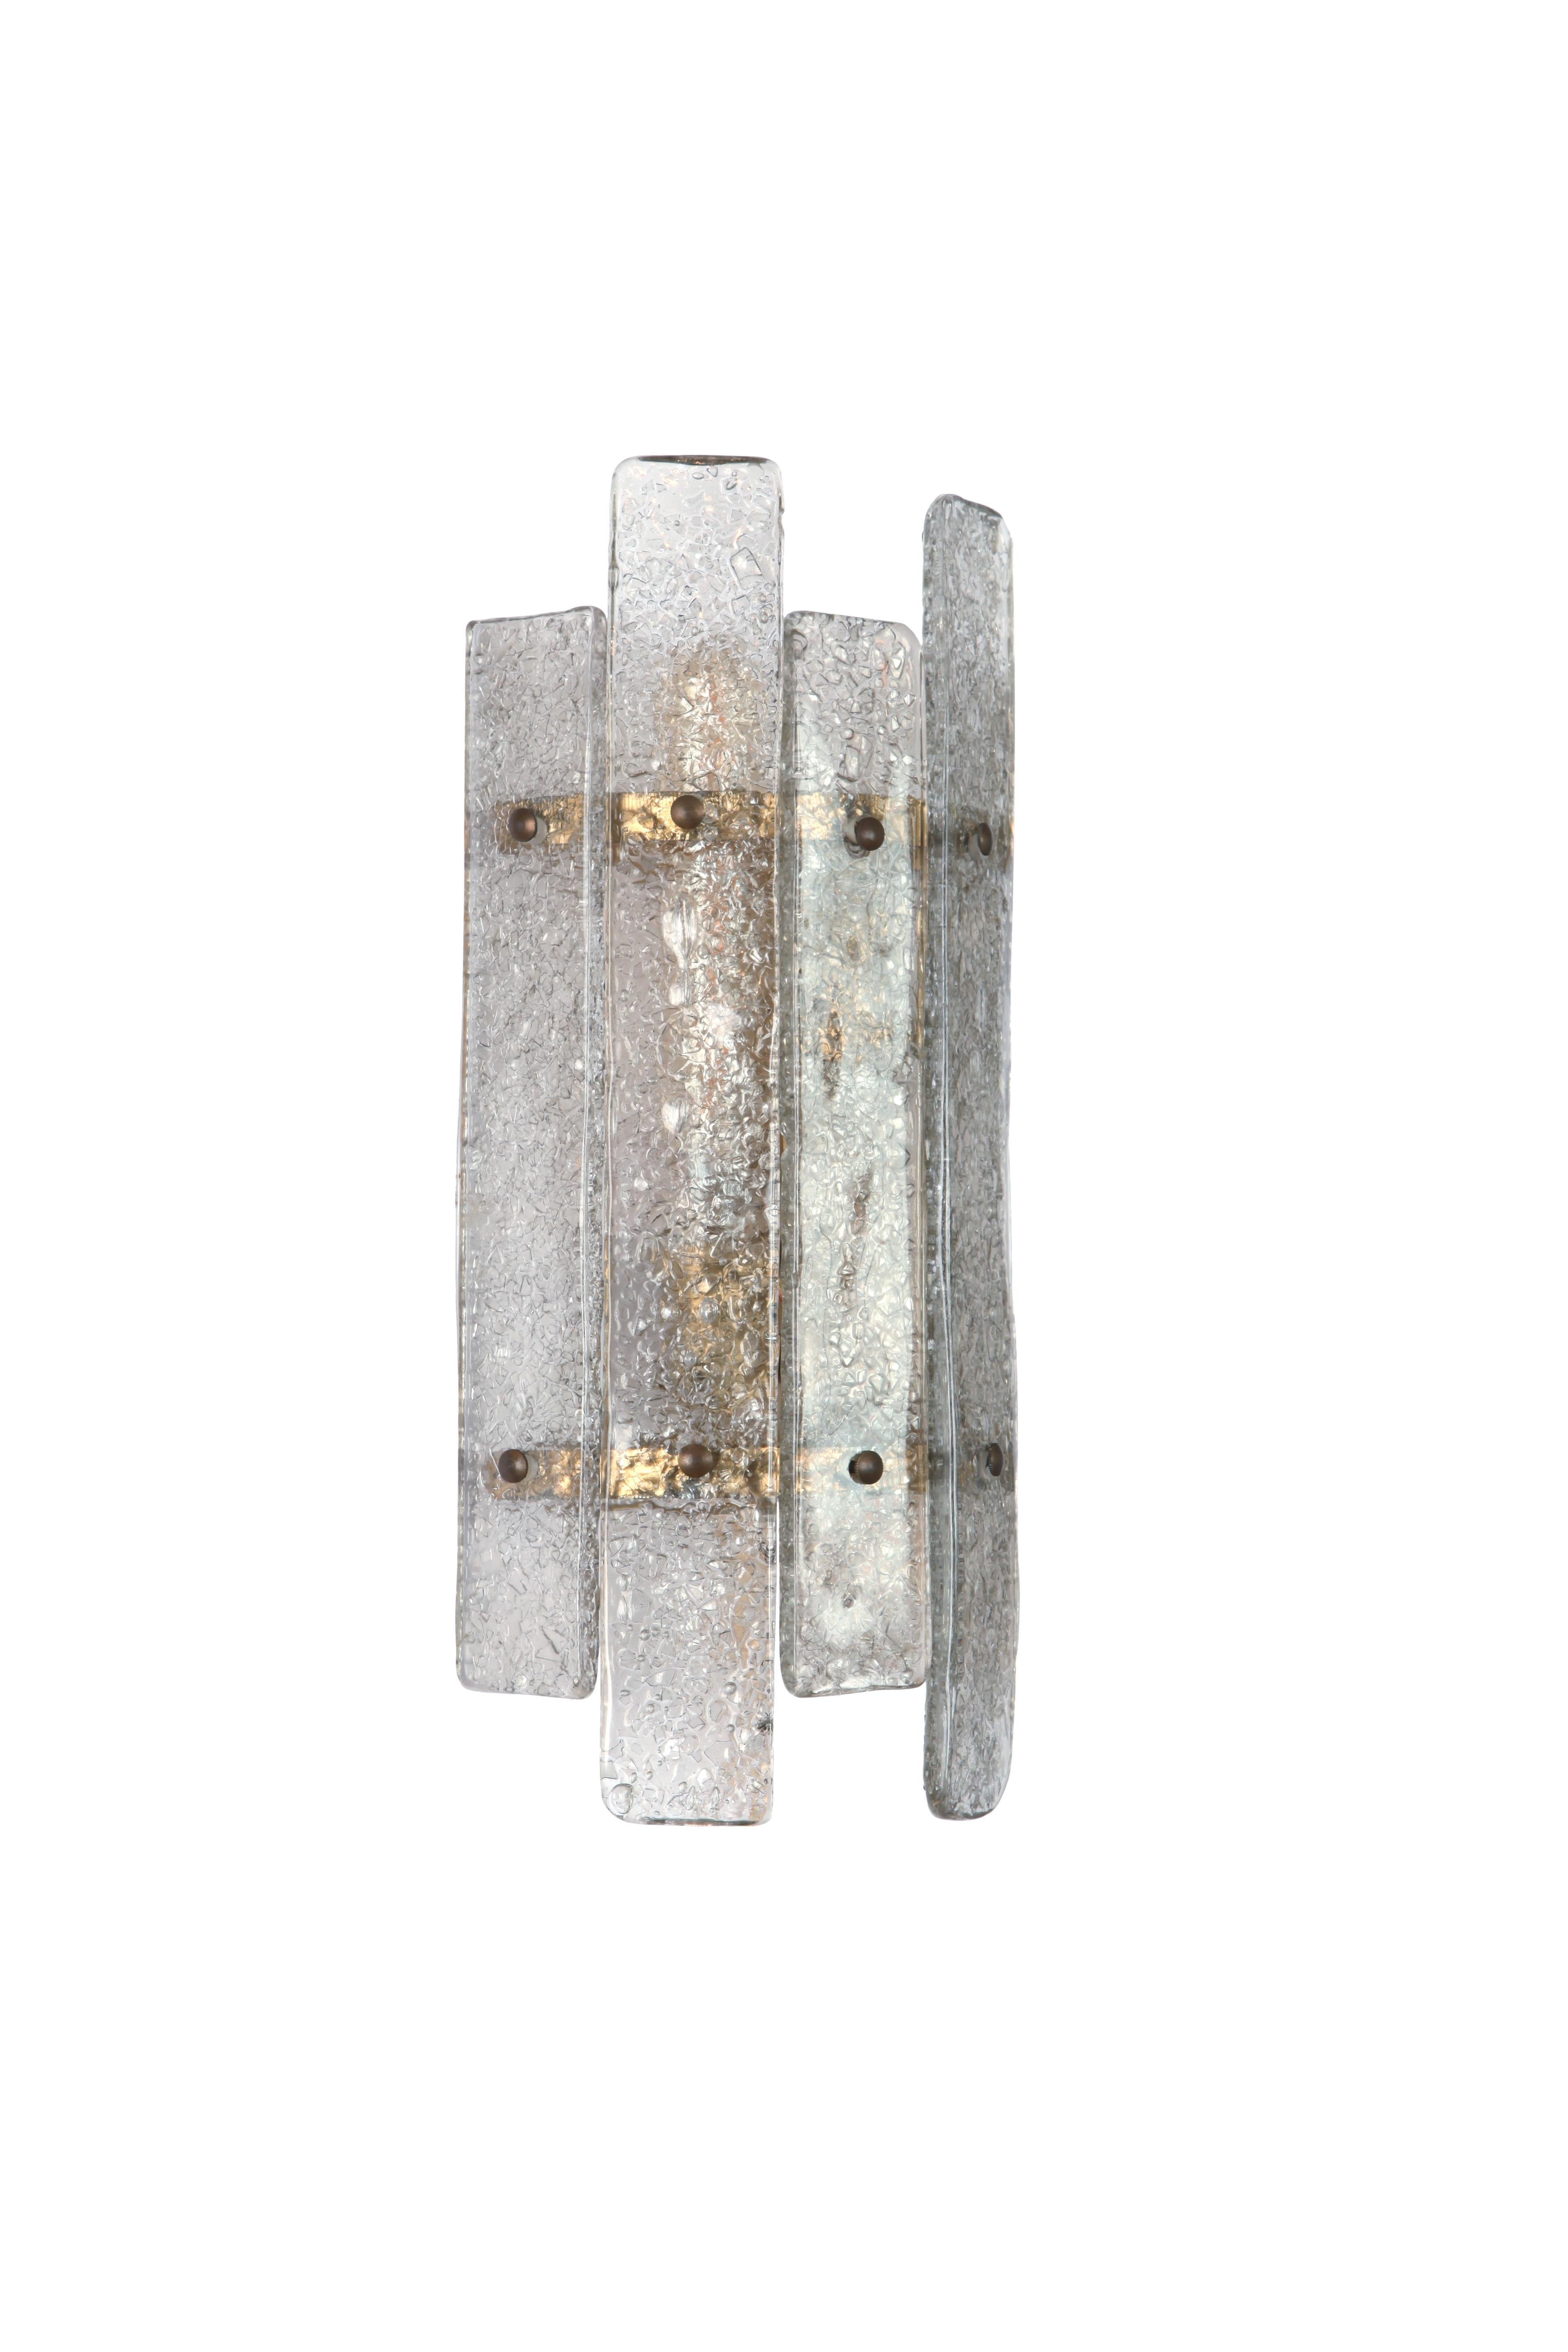 Wall sconce from Italy with textured Murano glass panels. Tiny pieces of glass were fused to the glass panels which refract the light when it shines through. The glass has a light smoke colour to it.

Brass frame with aged brass screws.

Wired